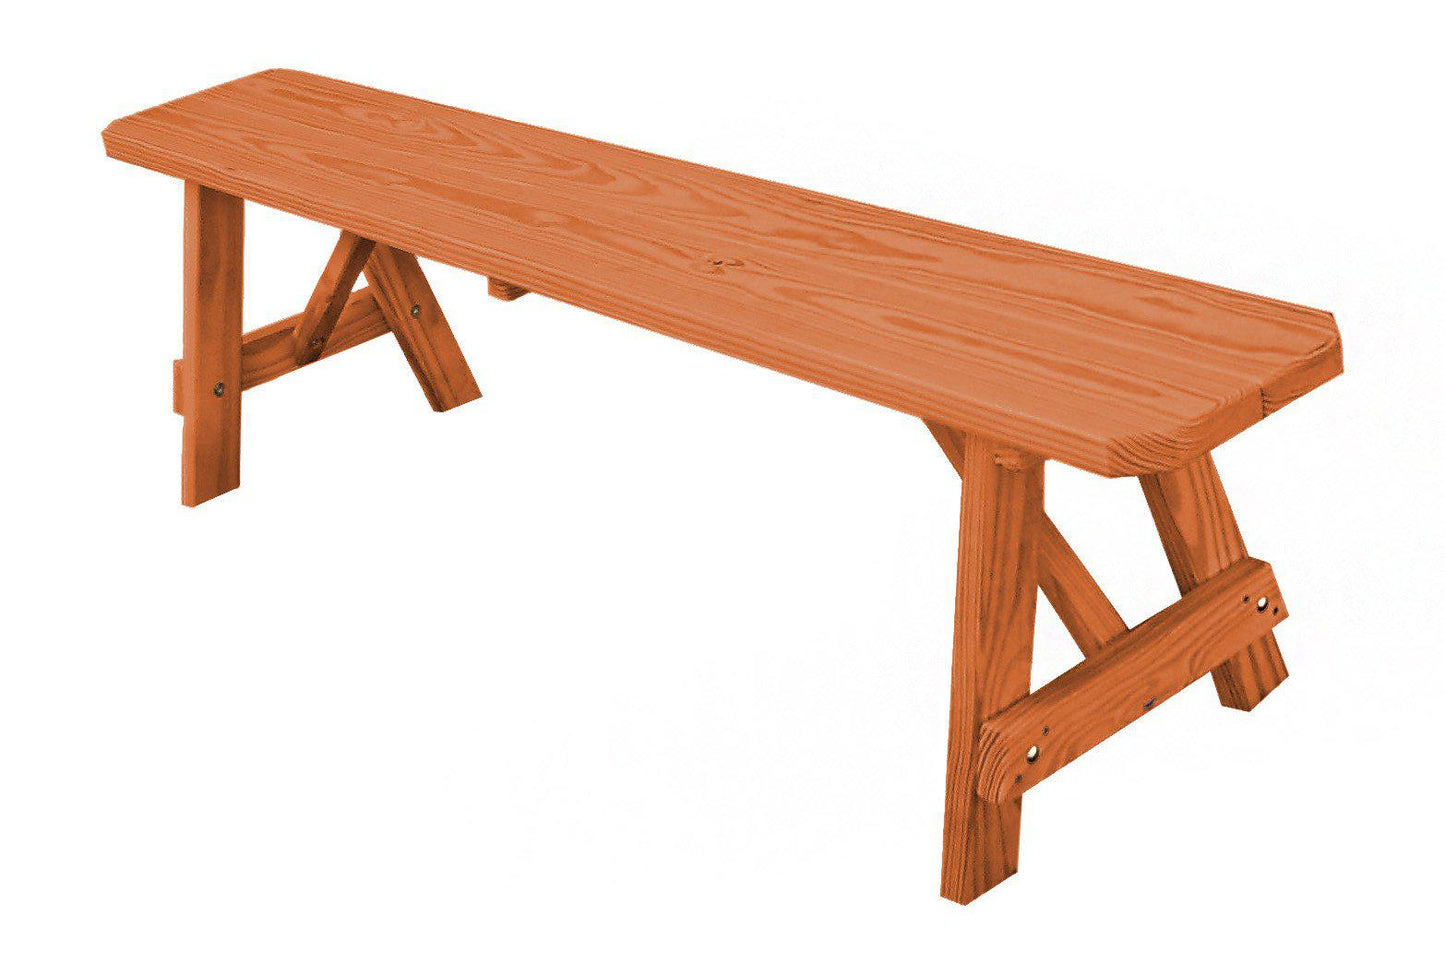 A&L Furniture Co. Pressure Treated Pine 70" Traditional Bench Only - LEAD TIME TO SHIP 10 BUSINESS DAYS